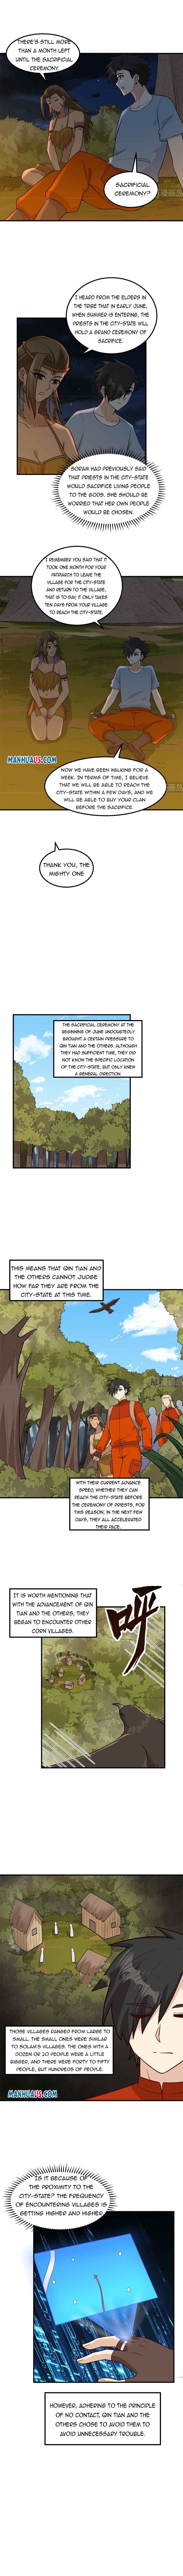 Survive On A Deserted Island With Beautiful Girls - Page 2